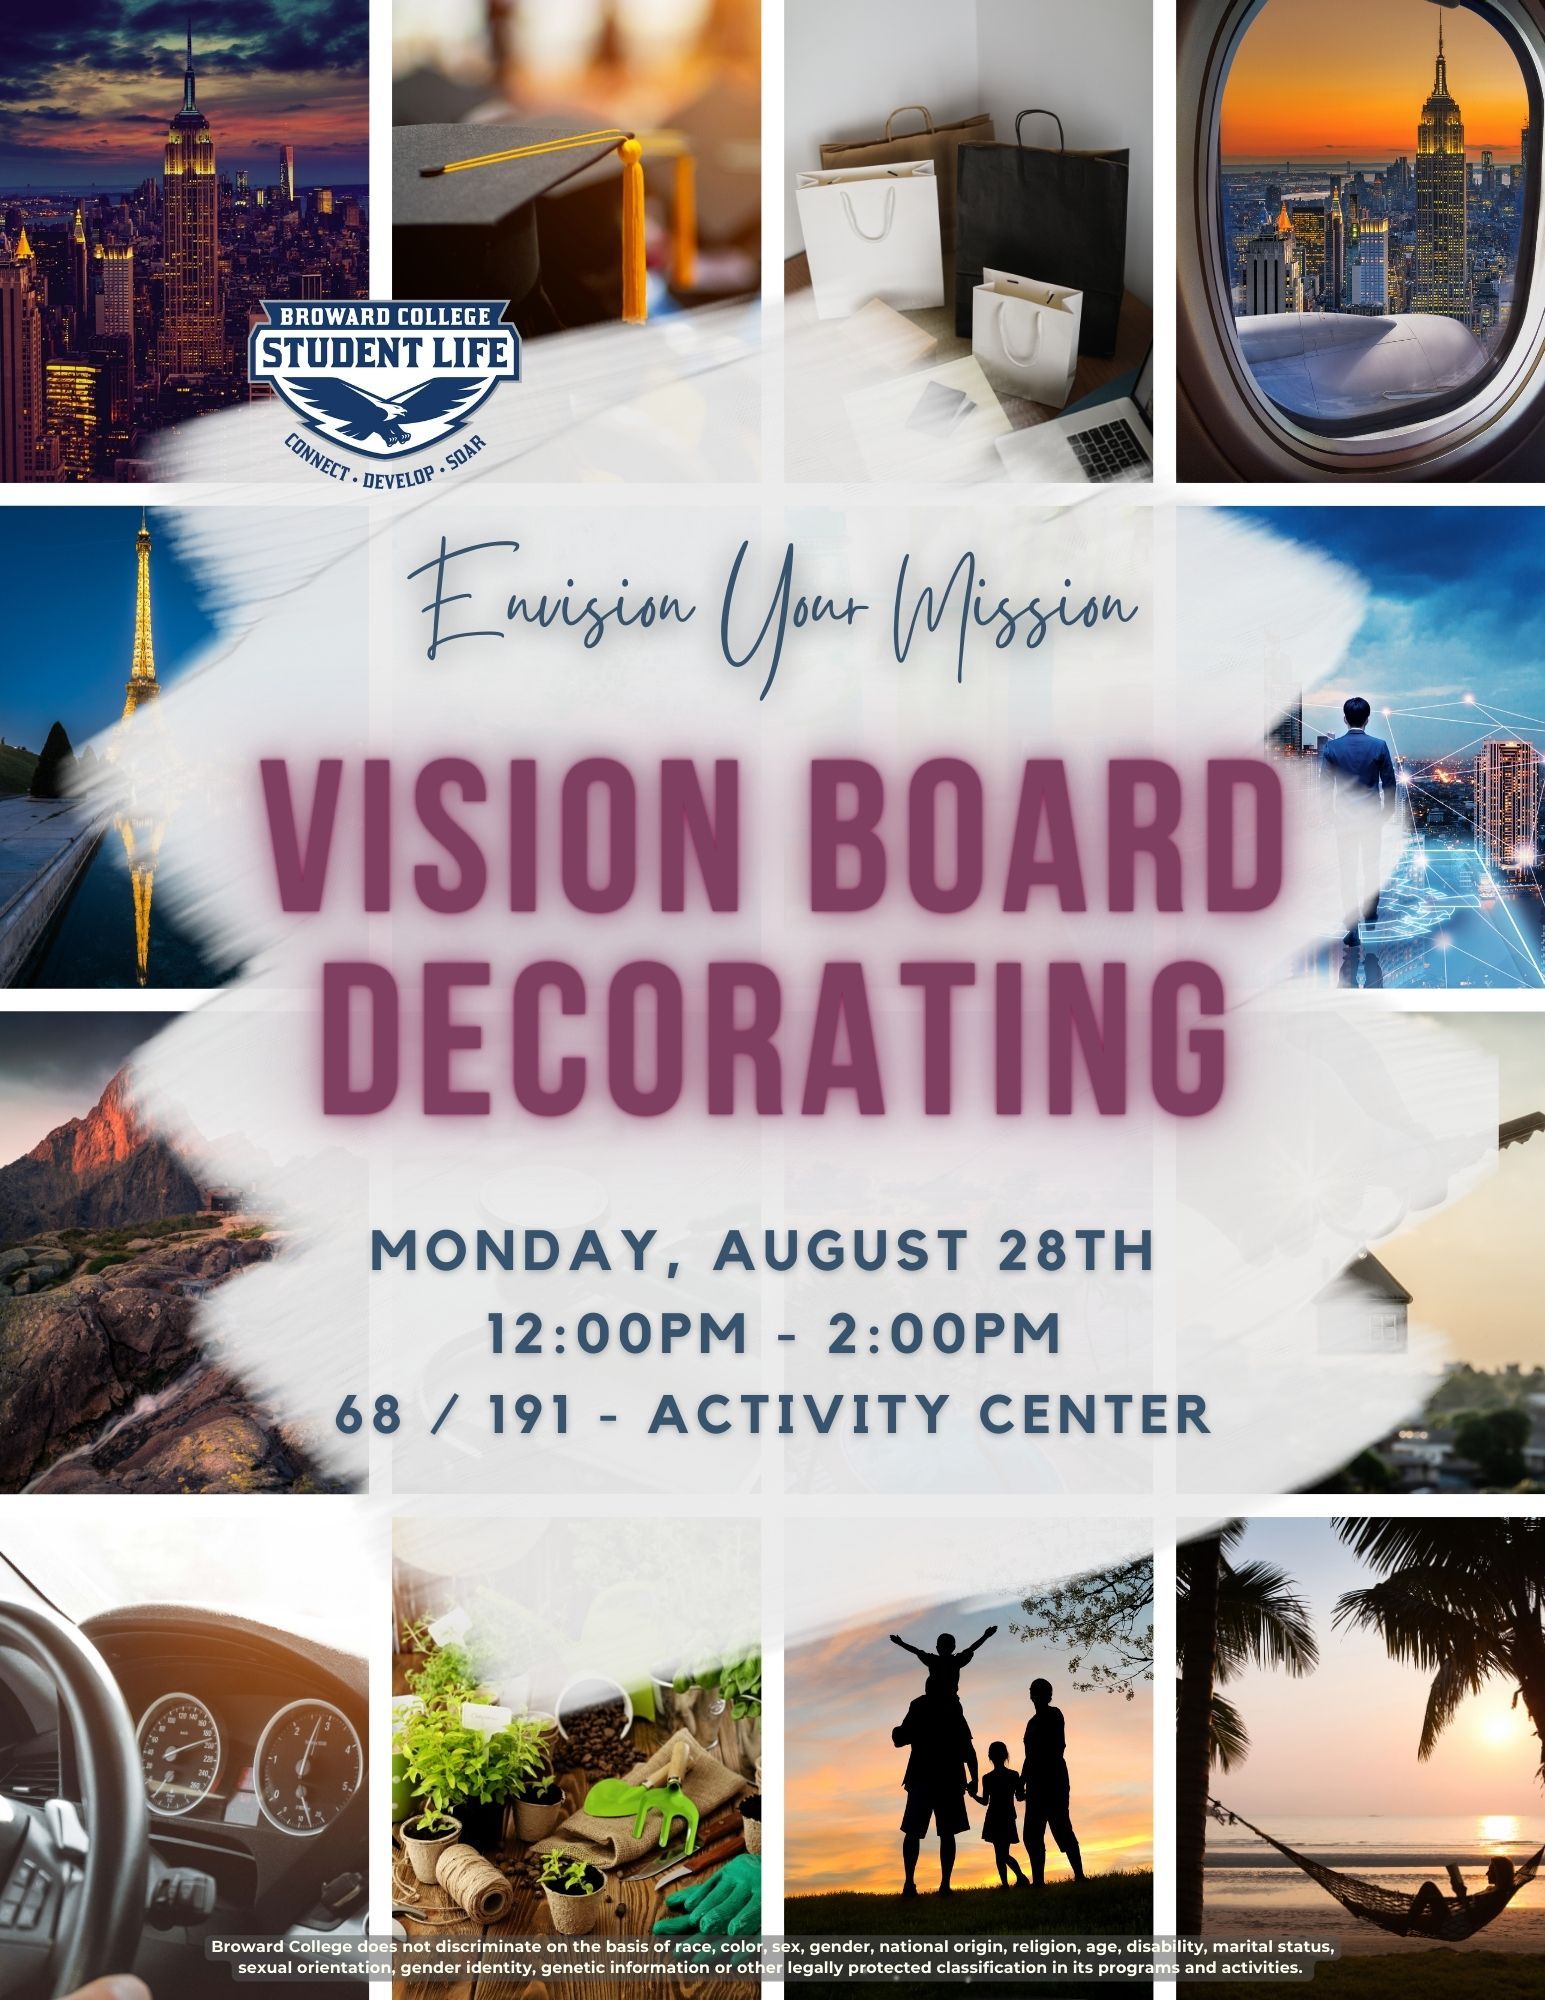 Envision Your Mission: Vision Board Decorating